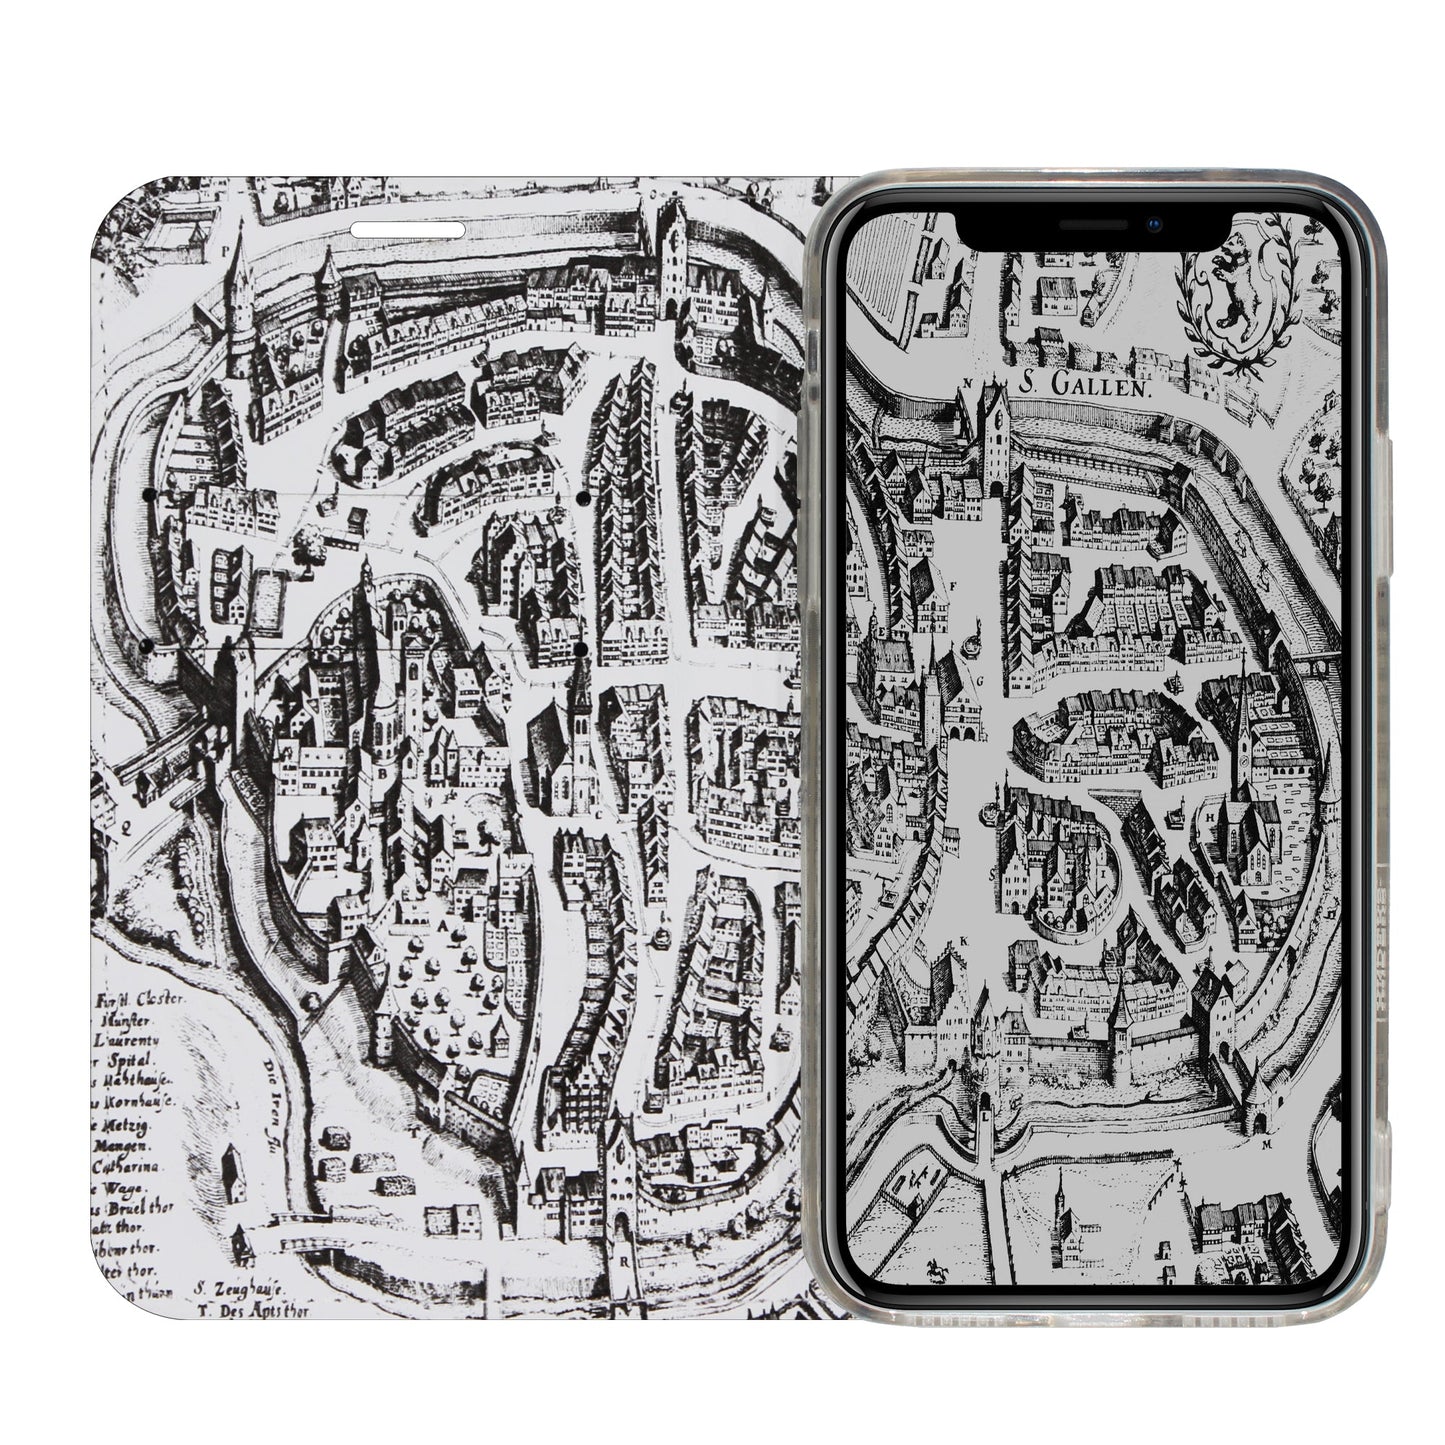 St. Gallen Merian Panorama Case for iPhone X/XS